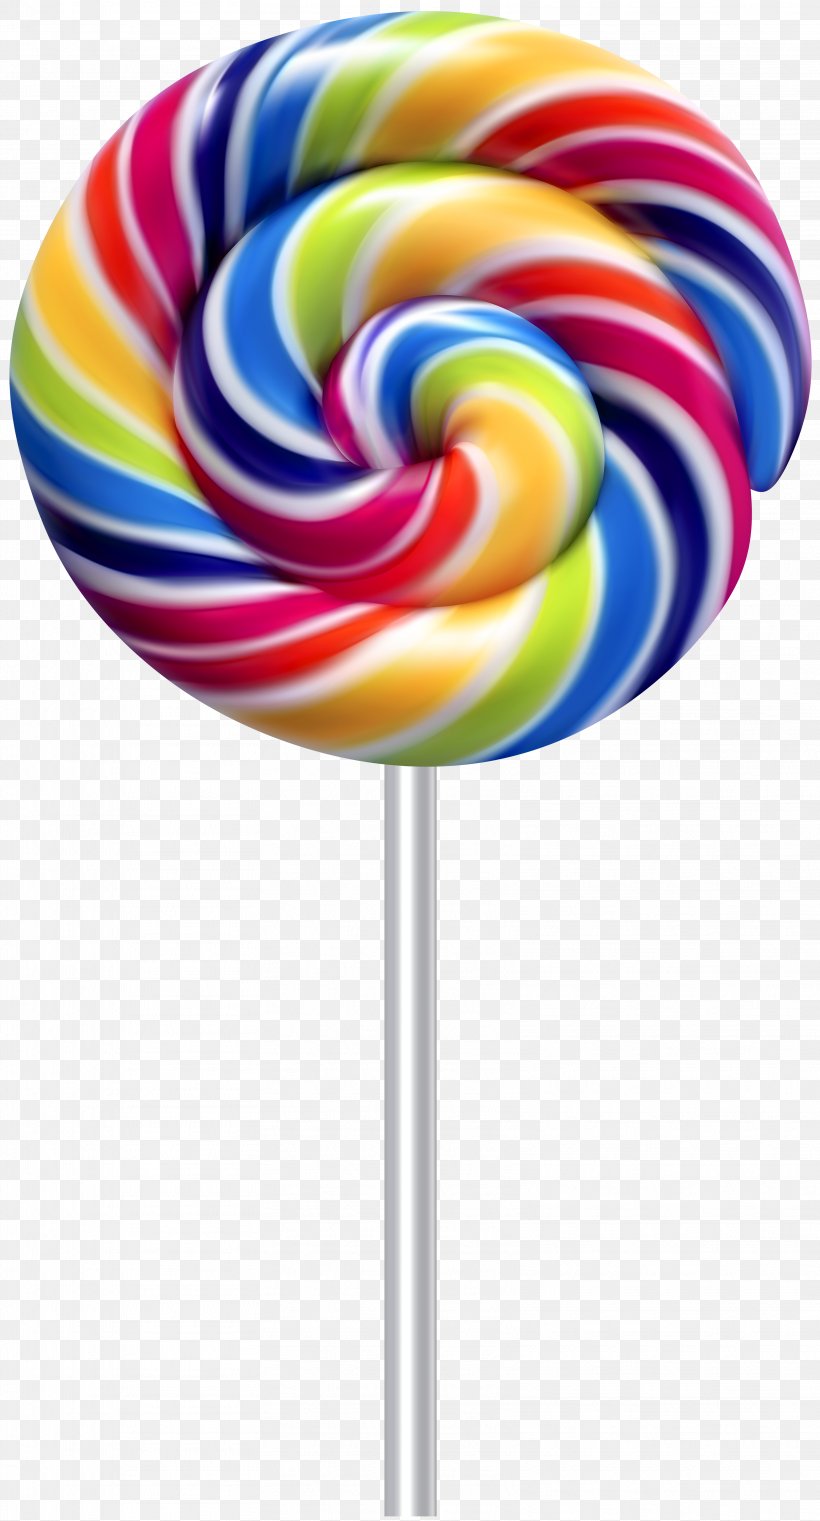 Lollipop Candy Cane Stick Candy, PNG, 3234x6000px, Lollipop, Candy, Candy Cane, Chocolate, Confectionery Download Free